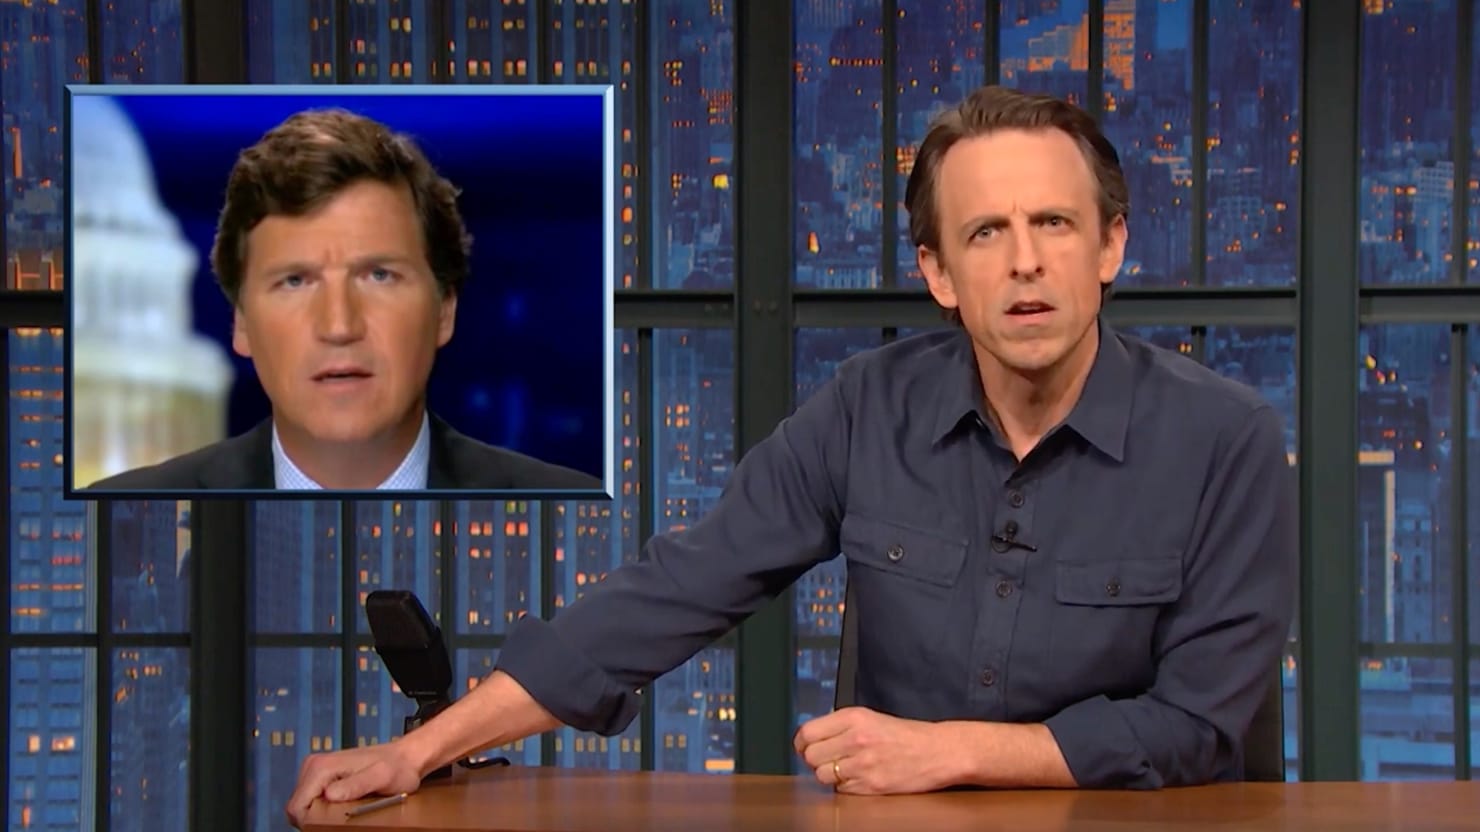 Seth Meyers dismantles Texas Lies “Insanely Obvious” by Tucker Carlson